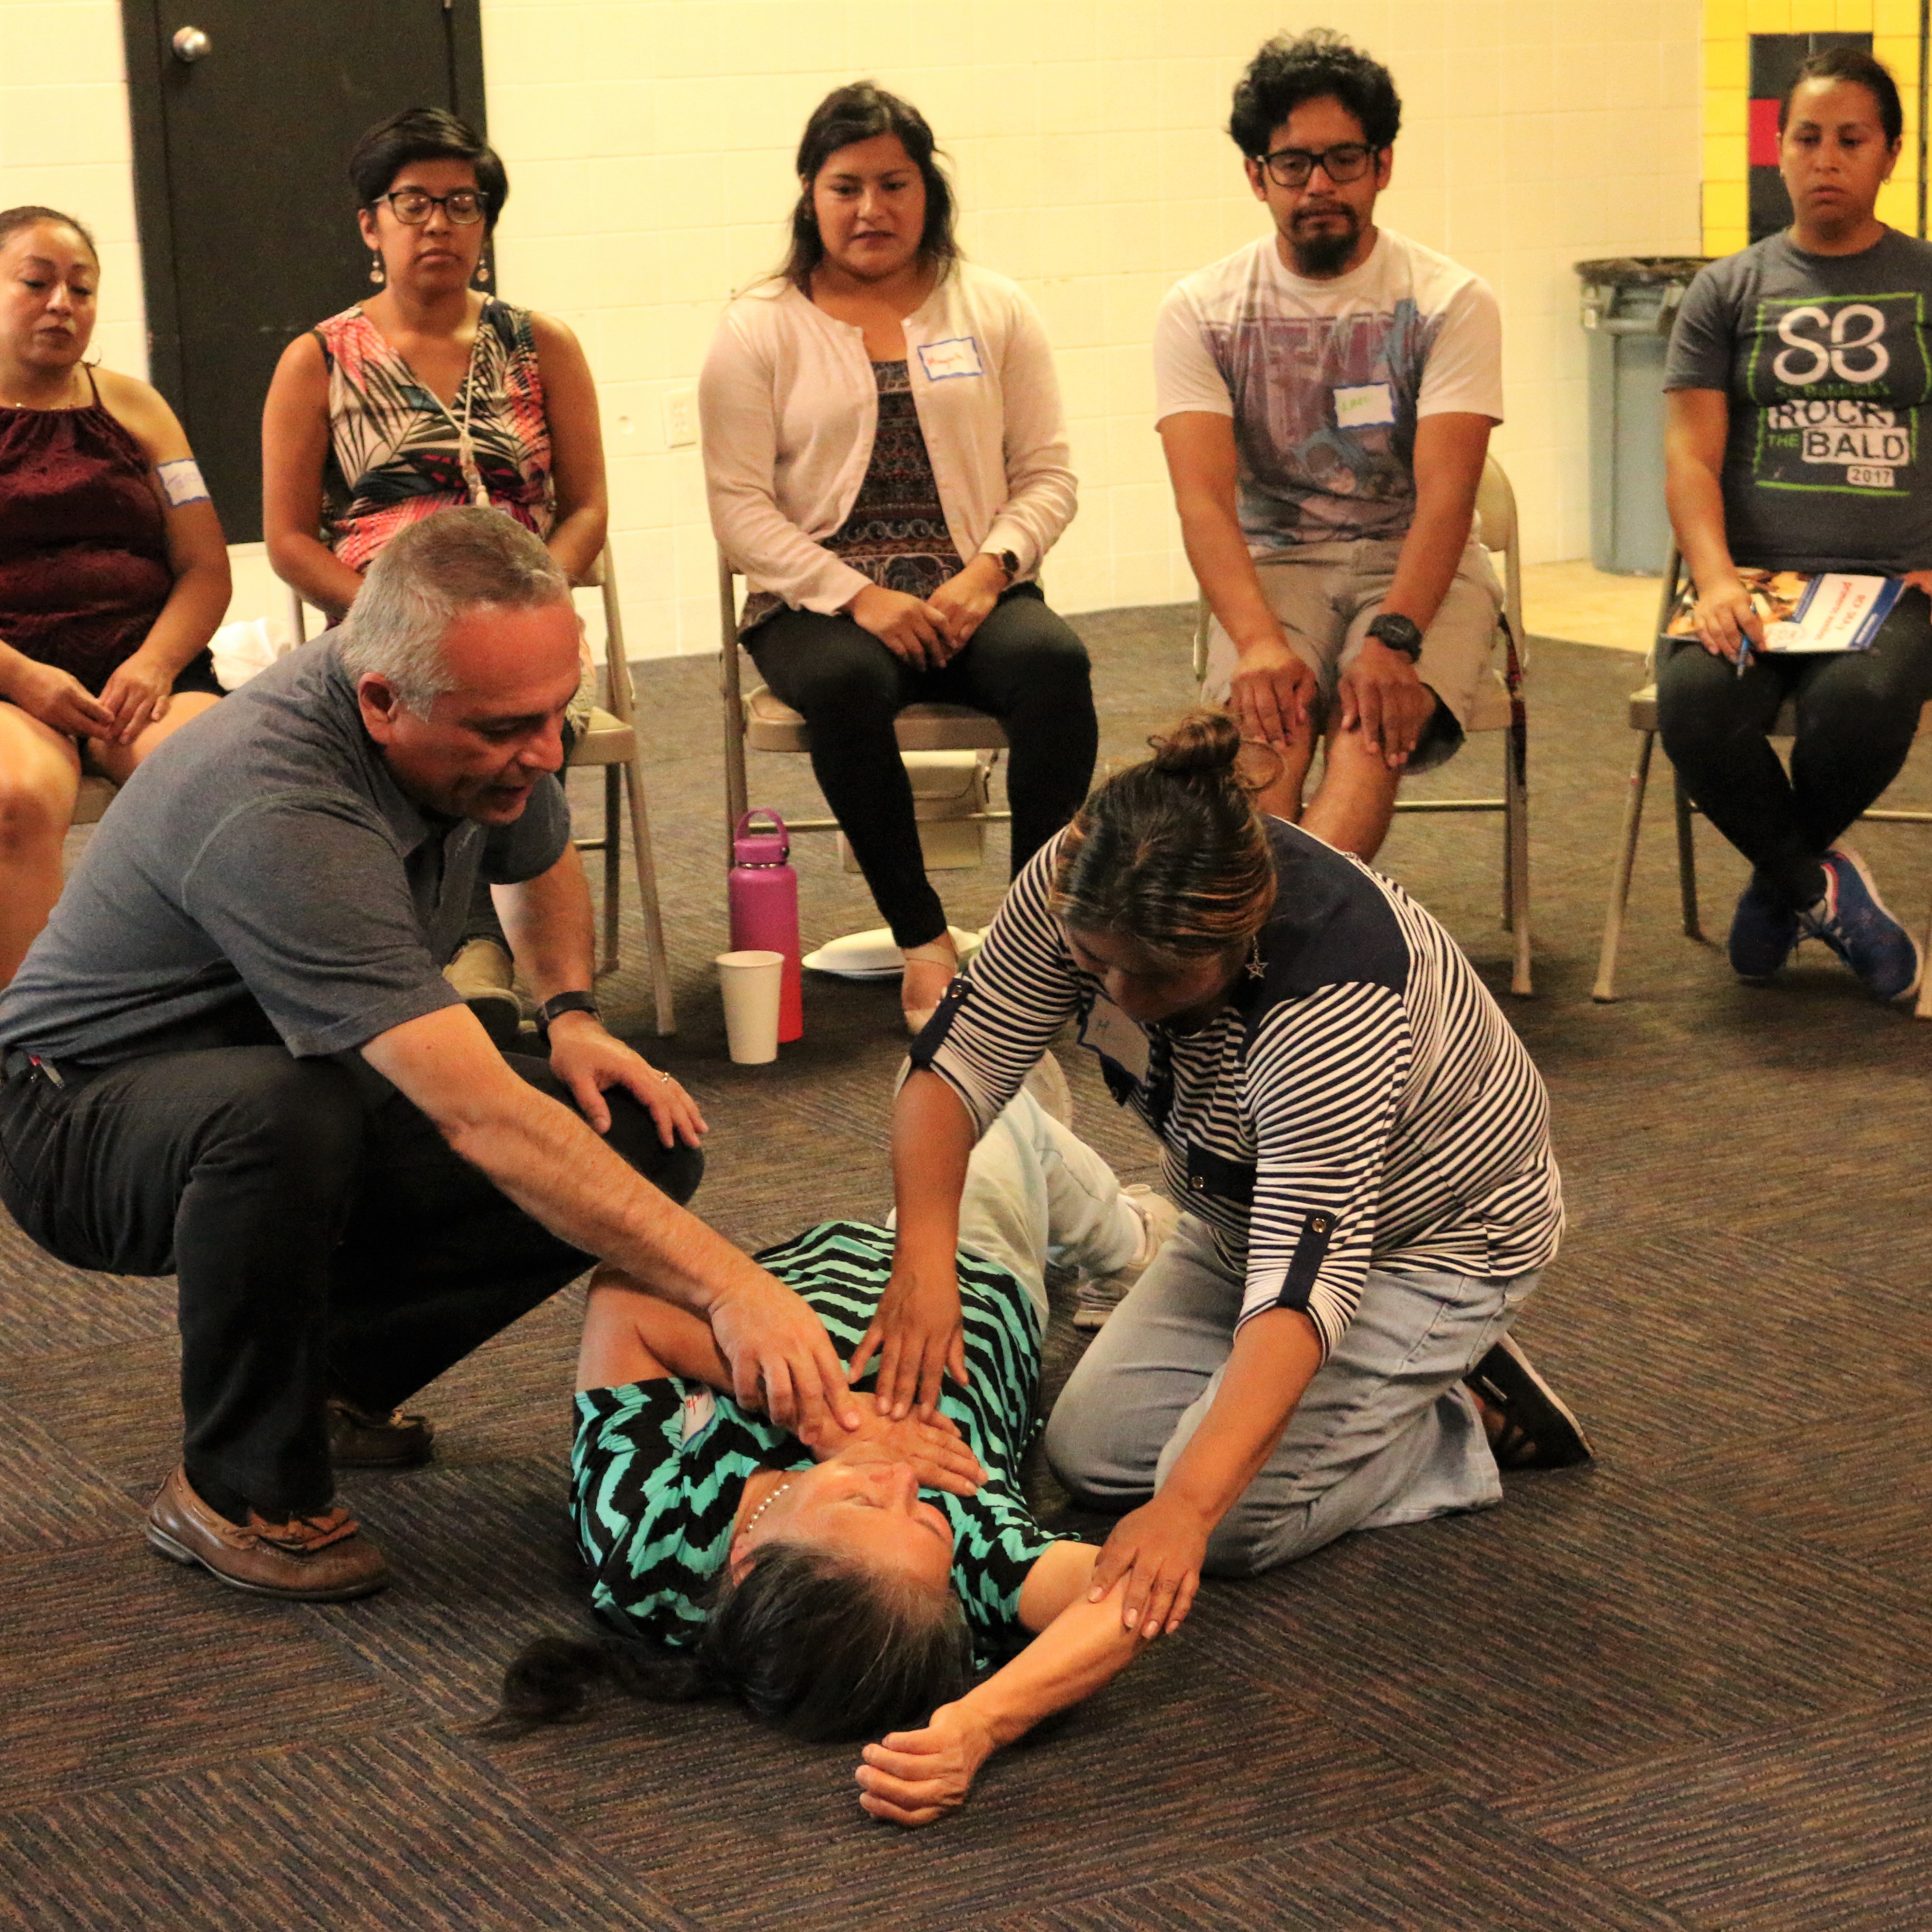 LISTOS volunteers receive CPR training in Portland's Cully neighborhood. An instructor shows a participant how to check the airway of victim volunteer. Several participants sit behind them and watch.